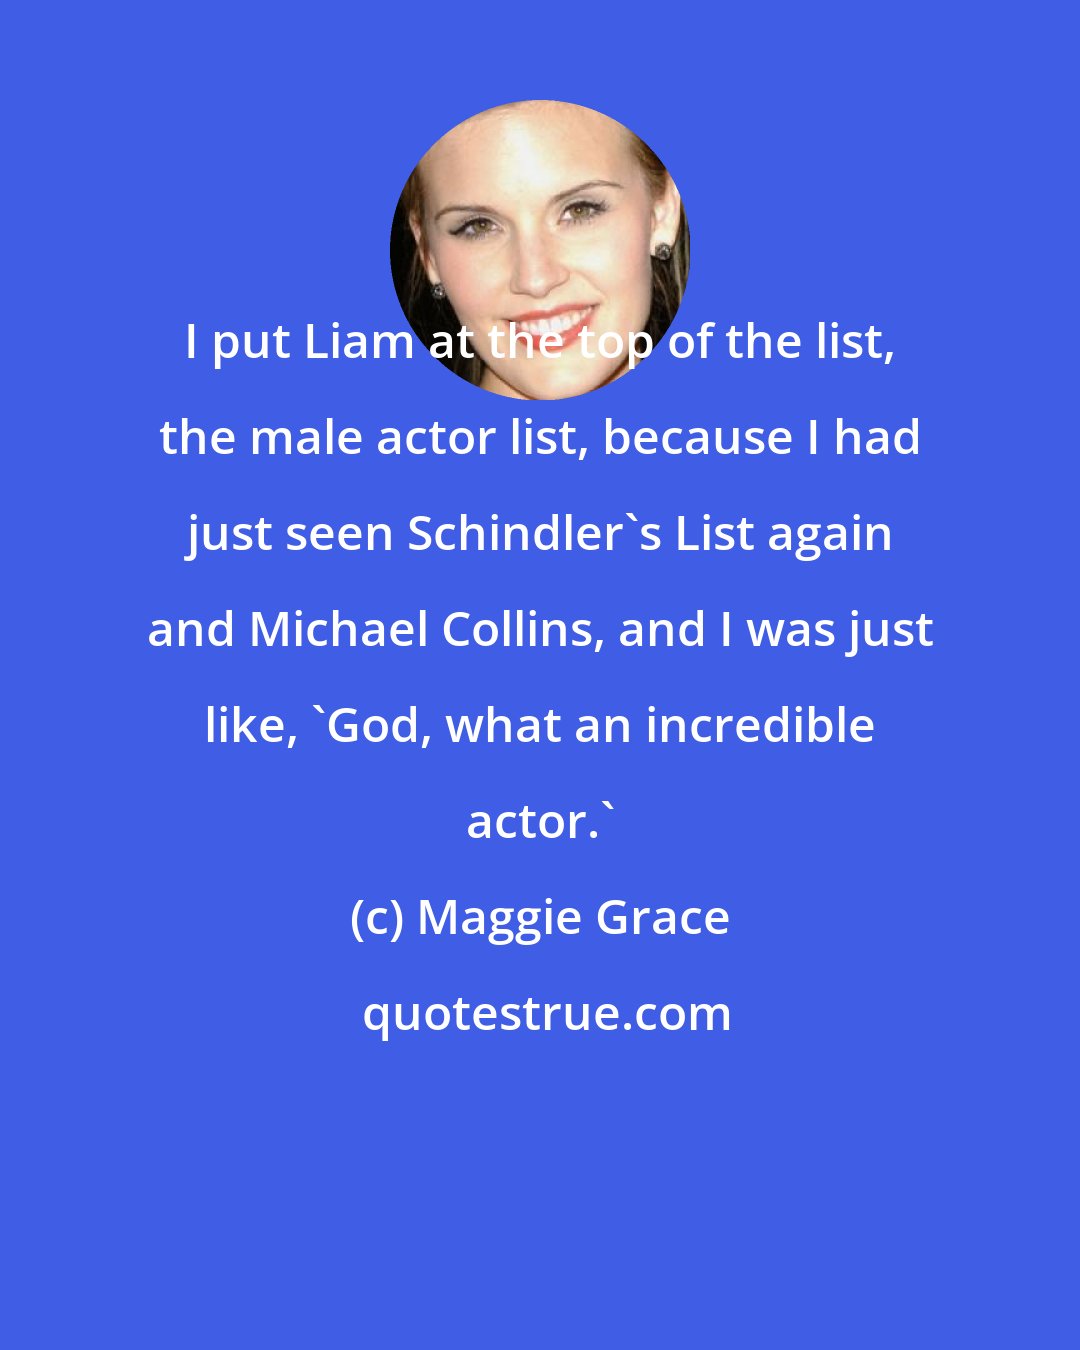 Maggie Grace: I put Liam at the top of the list, the male actor list, because I had just seen Schindler's List again and Michael Collins, and I was just like, 'God, what an incredible actor.'